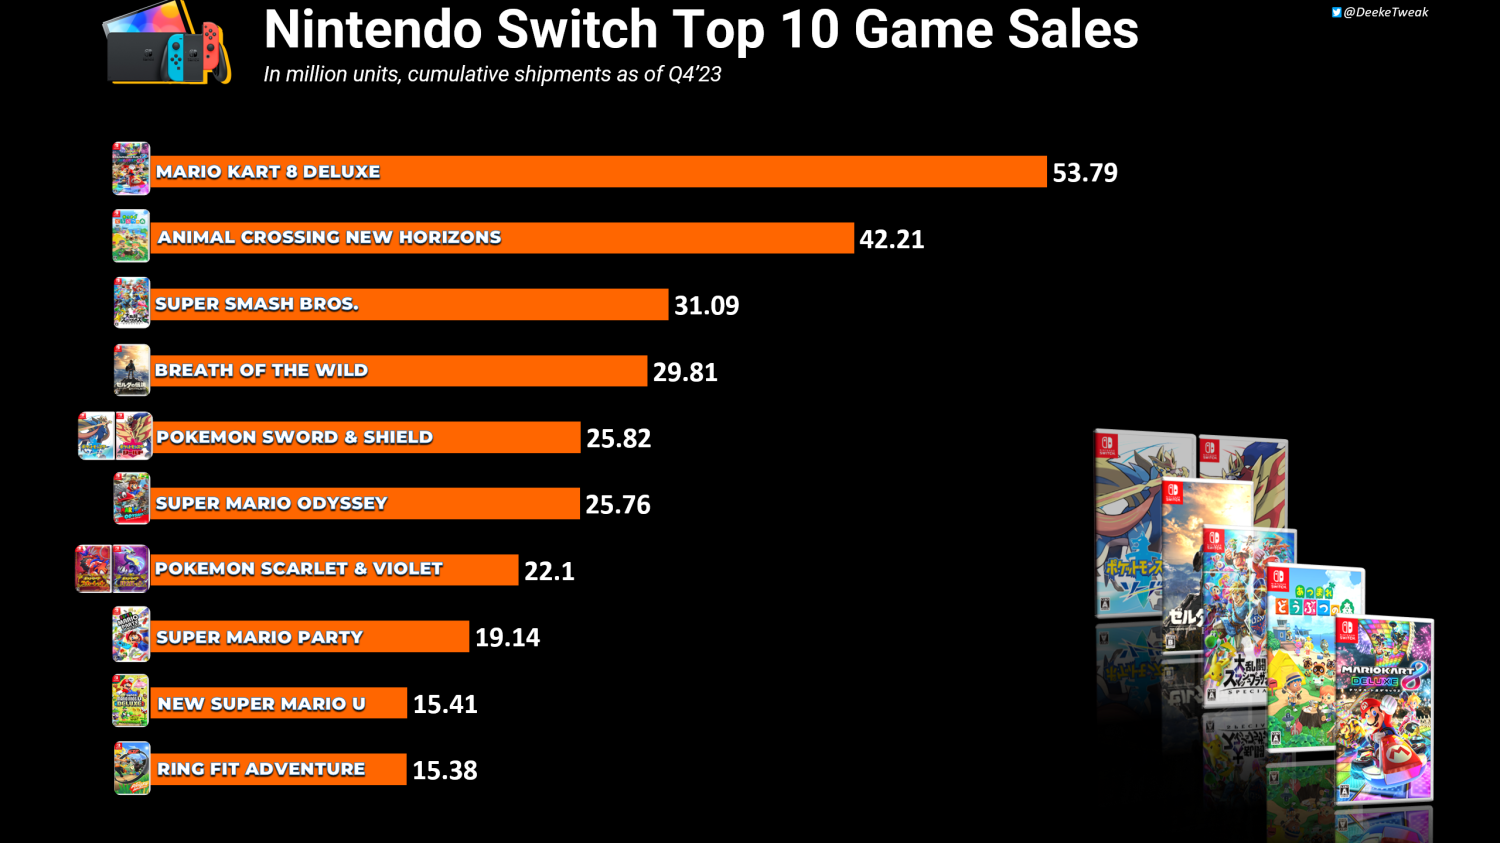 Zelda sales numbers, how many copies has Tears of the Kingdom sold?